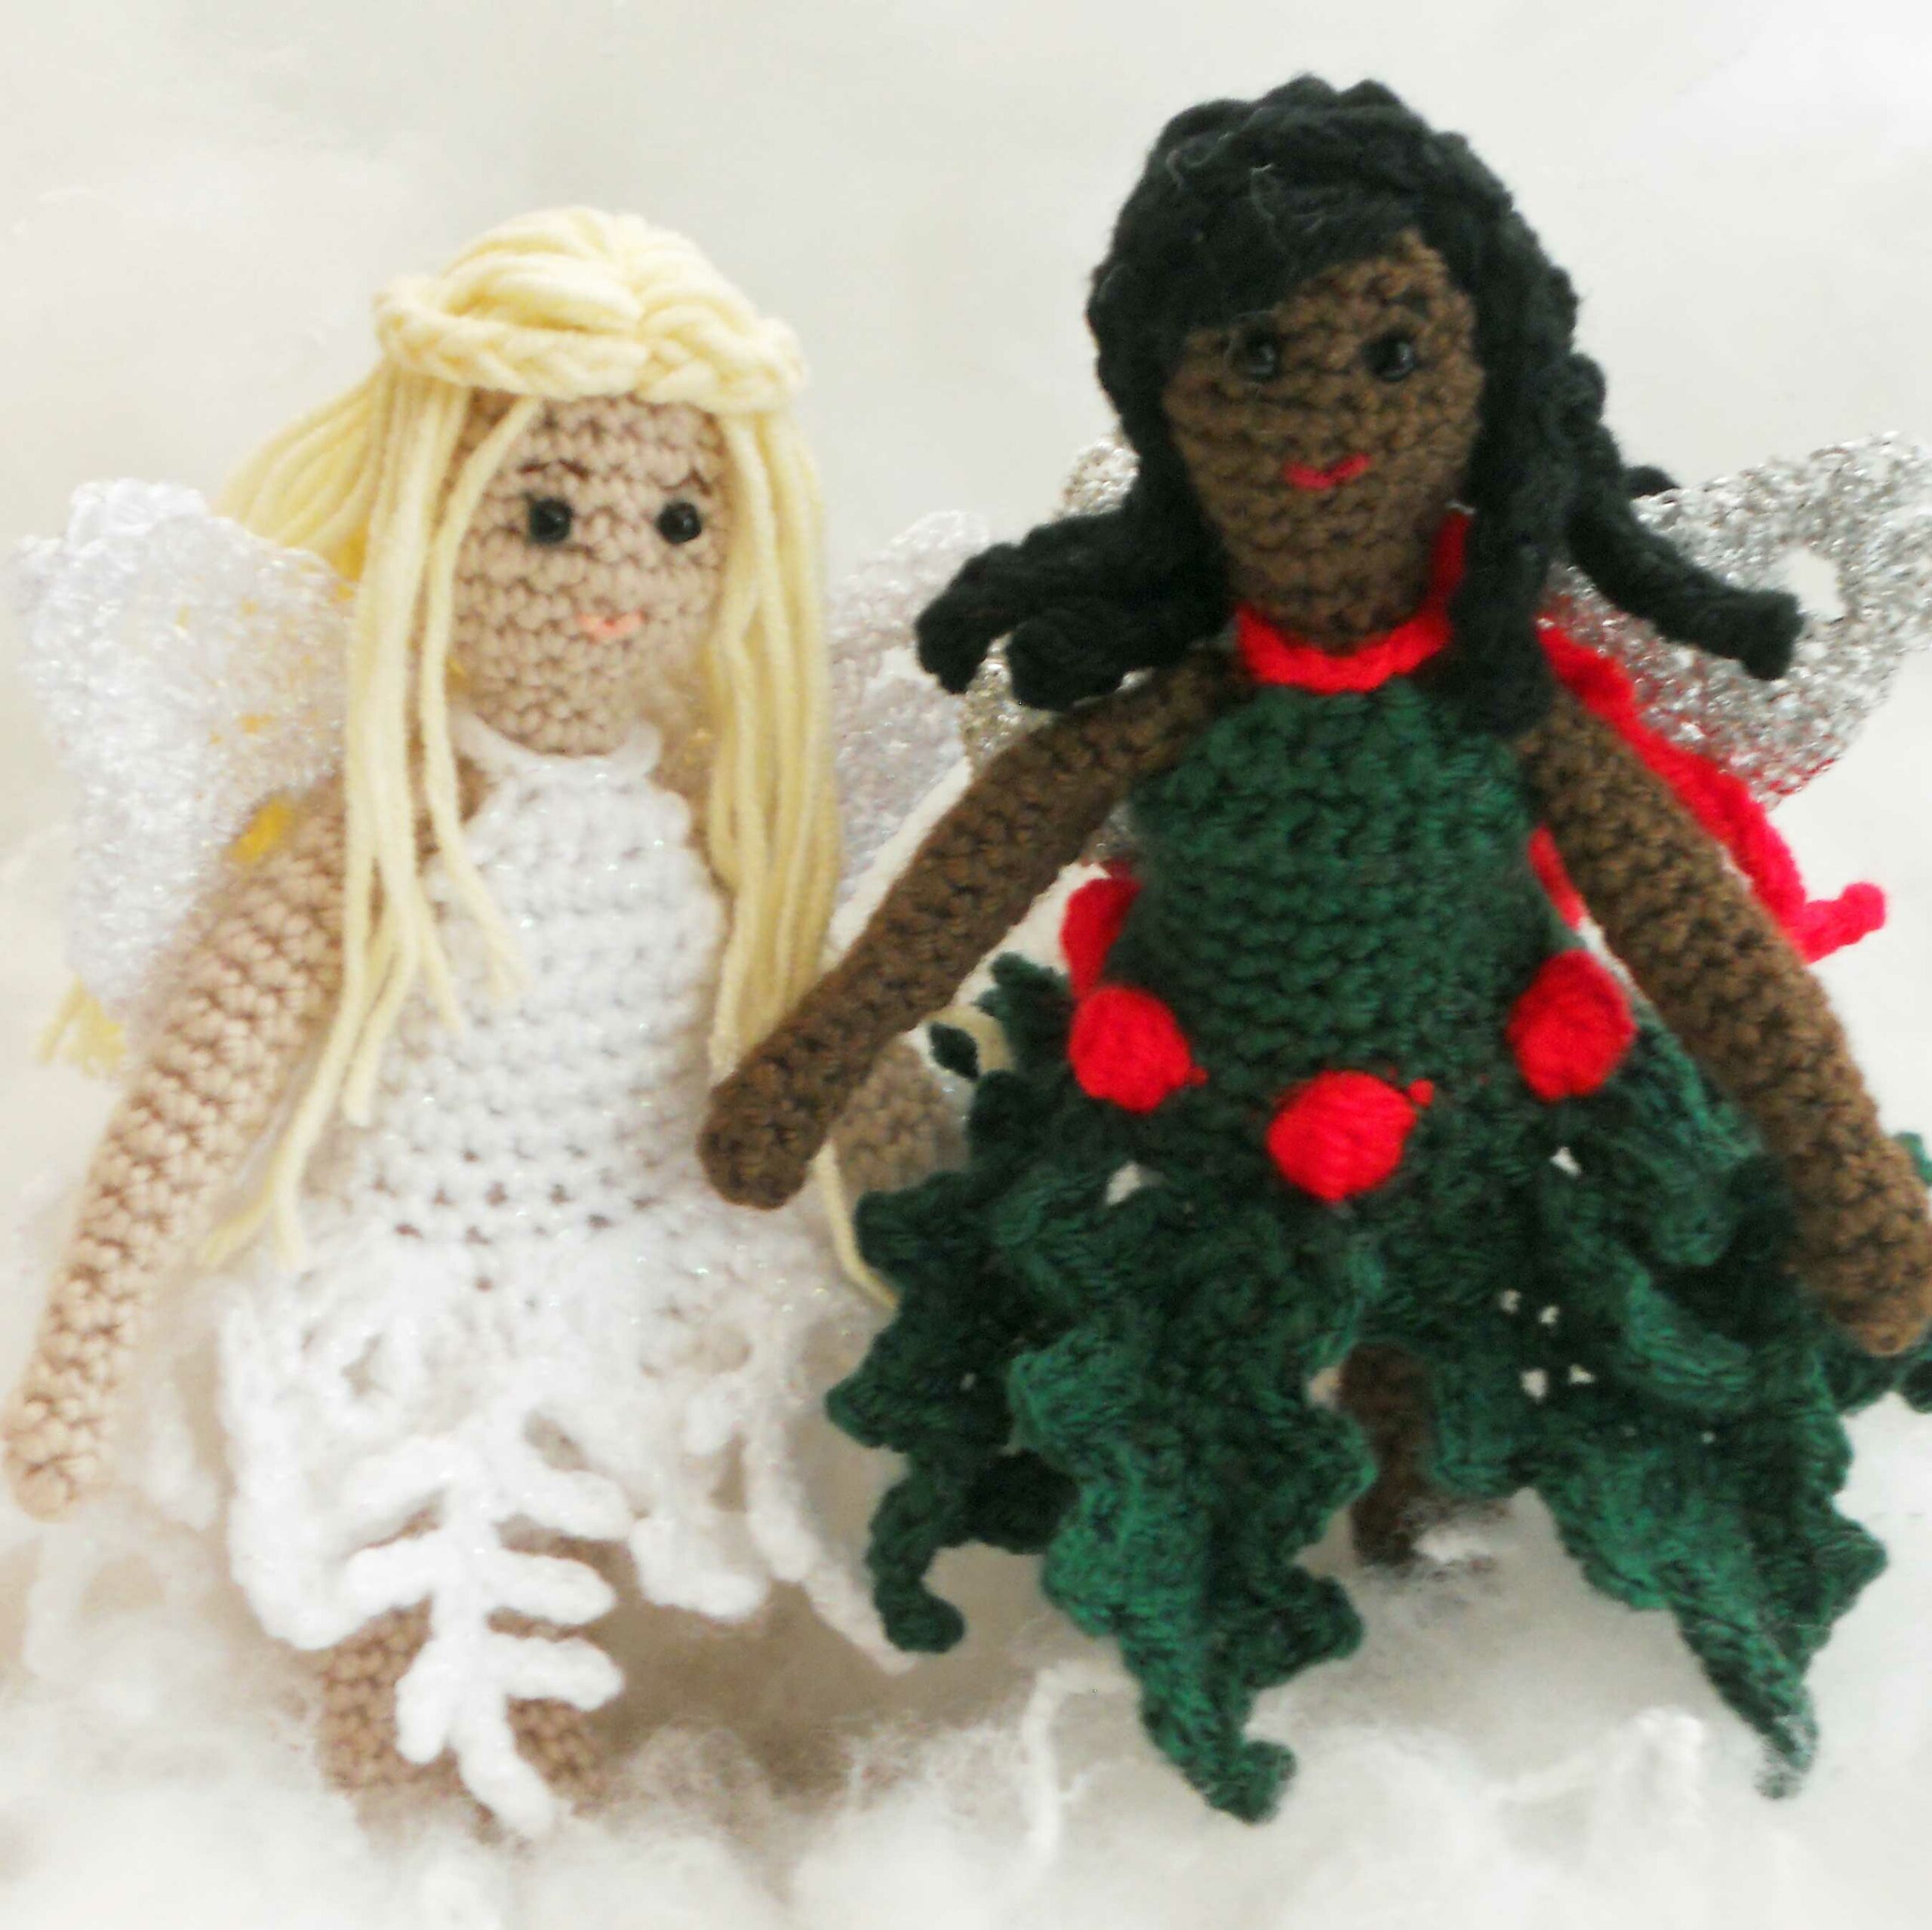 Snowflake and Holly, The Winter Fairies